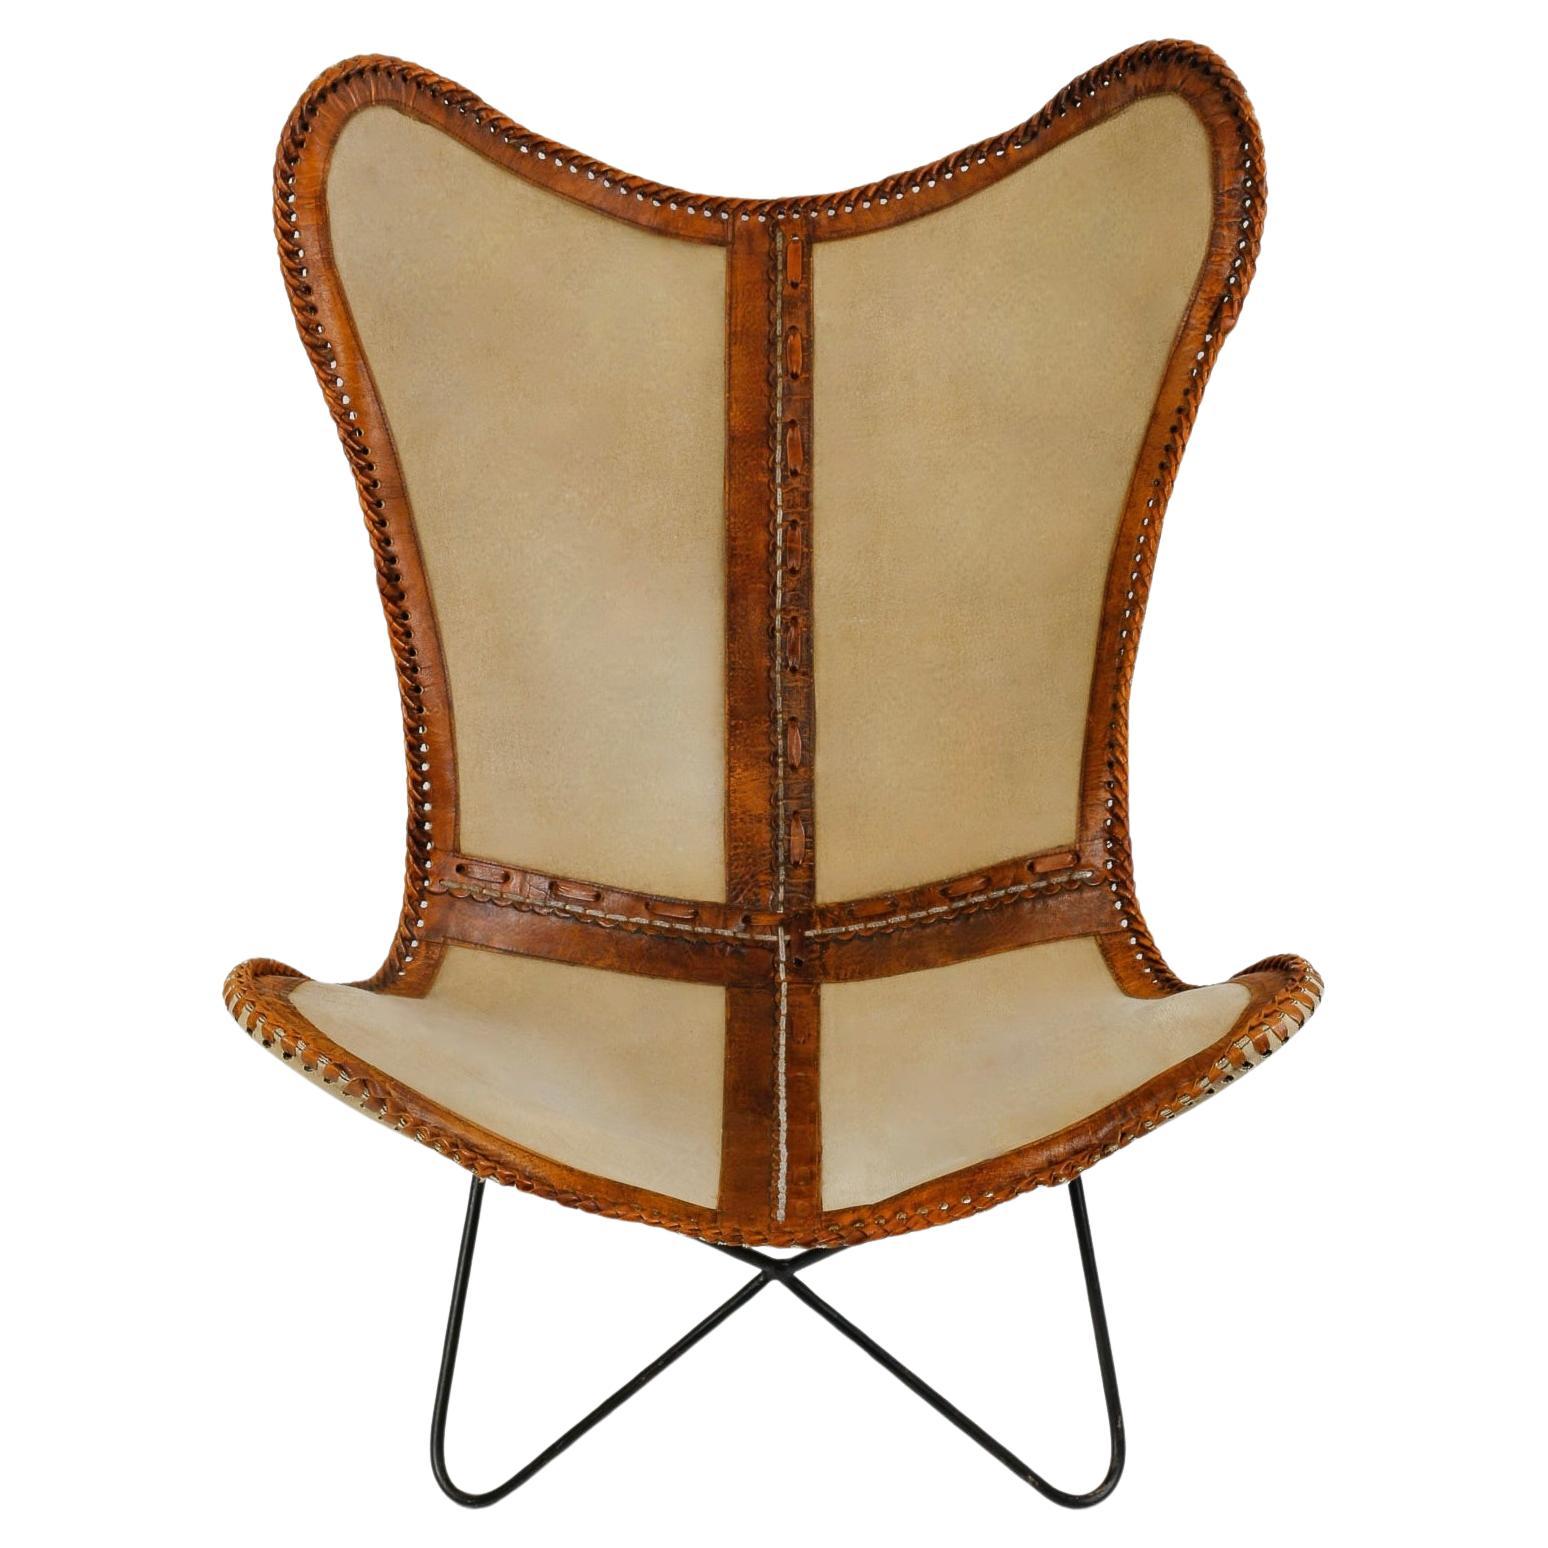 Black wrought-iron AA Airborne Butterfly armchair frame from the 1960's, covered with a saddler's cover from the Houlés workshops, made from 4 pieces of cream-colored hide joined by leather strips and edged with a brown patina leather border. 
Chic